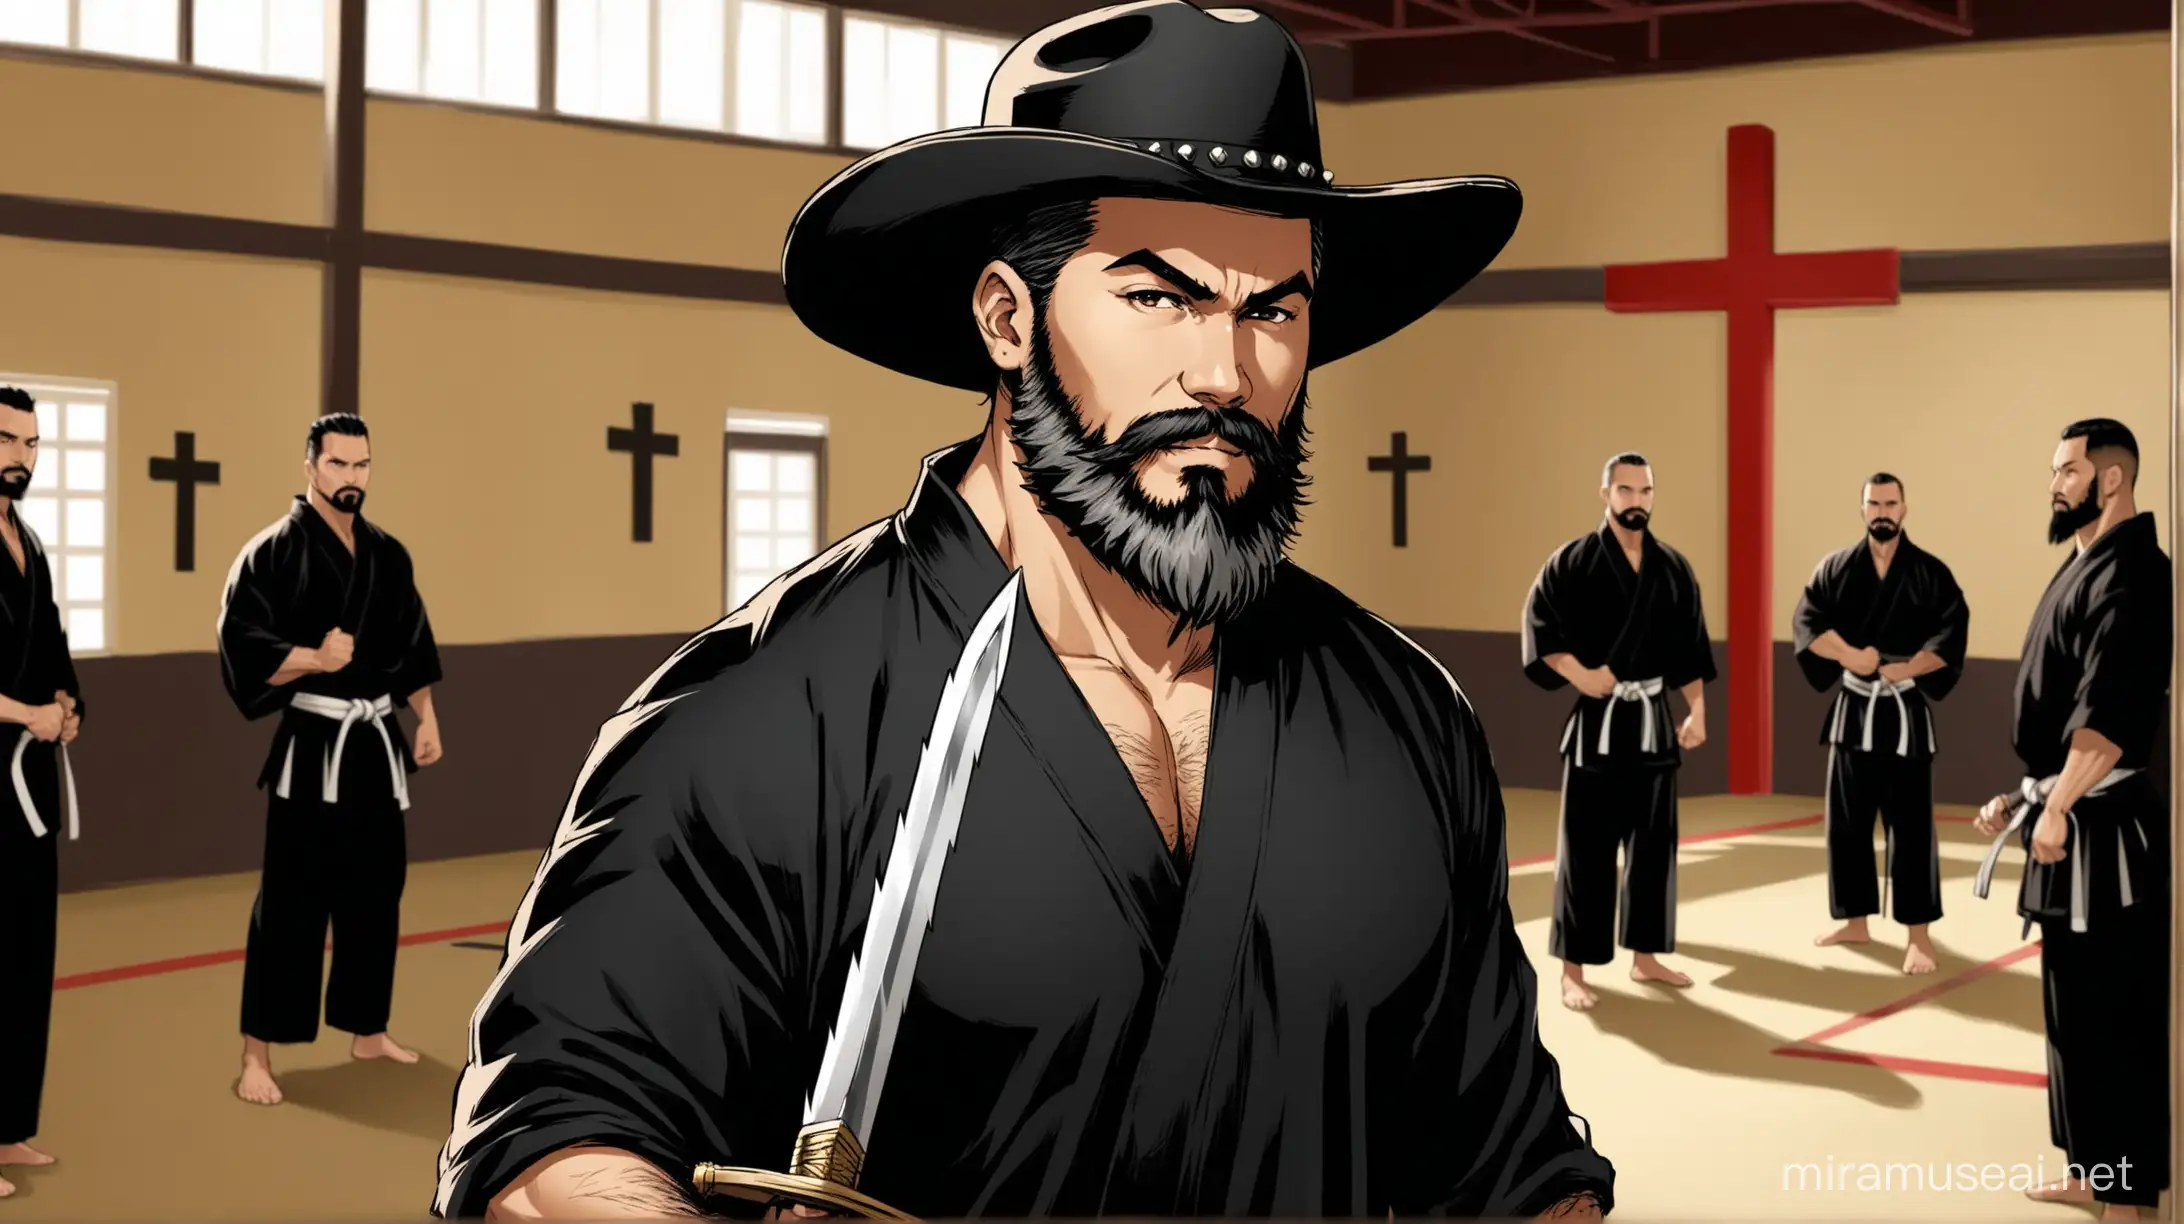 Handsome, strong middle-aged man light complected skin tone Latino with great salt and pepper black spiked hair and great beard, his  black cowboy hat removed and holding in his hand and a sword in the other.  Standing in a martial arts dojo with Catholic accents in the design of the dojo and Catholic crosses in the background